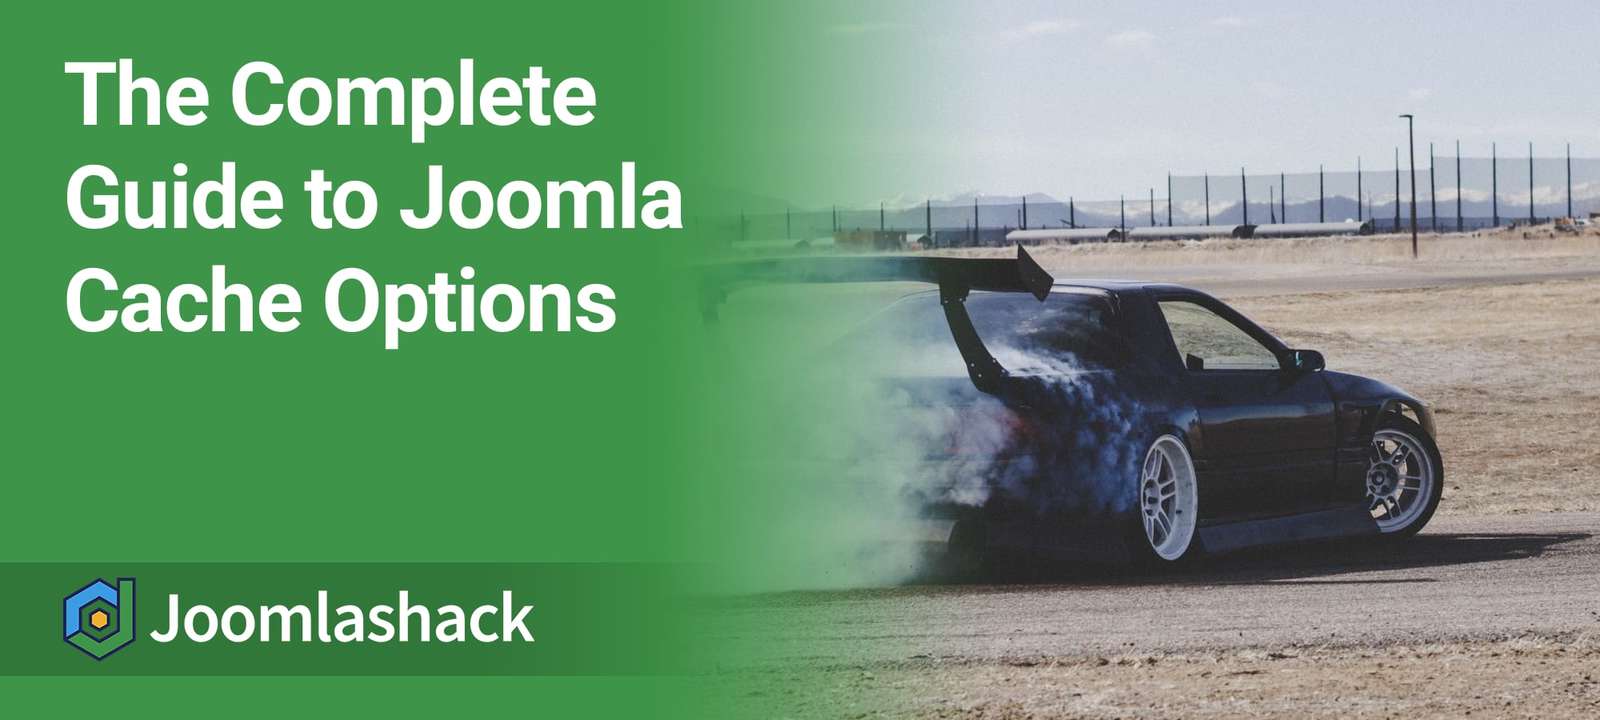 The Complete Guide to Joomla Cache Options